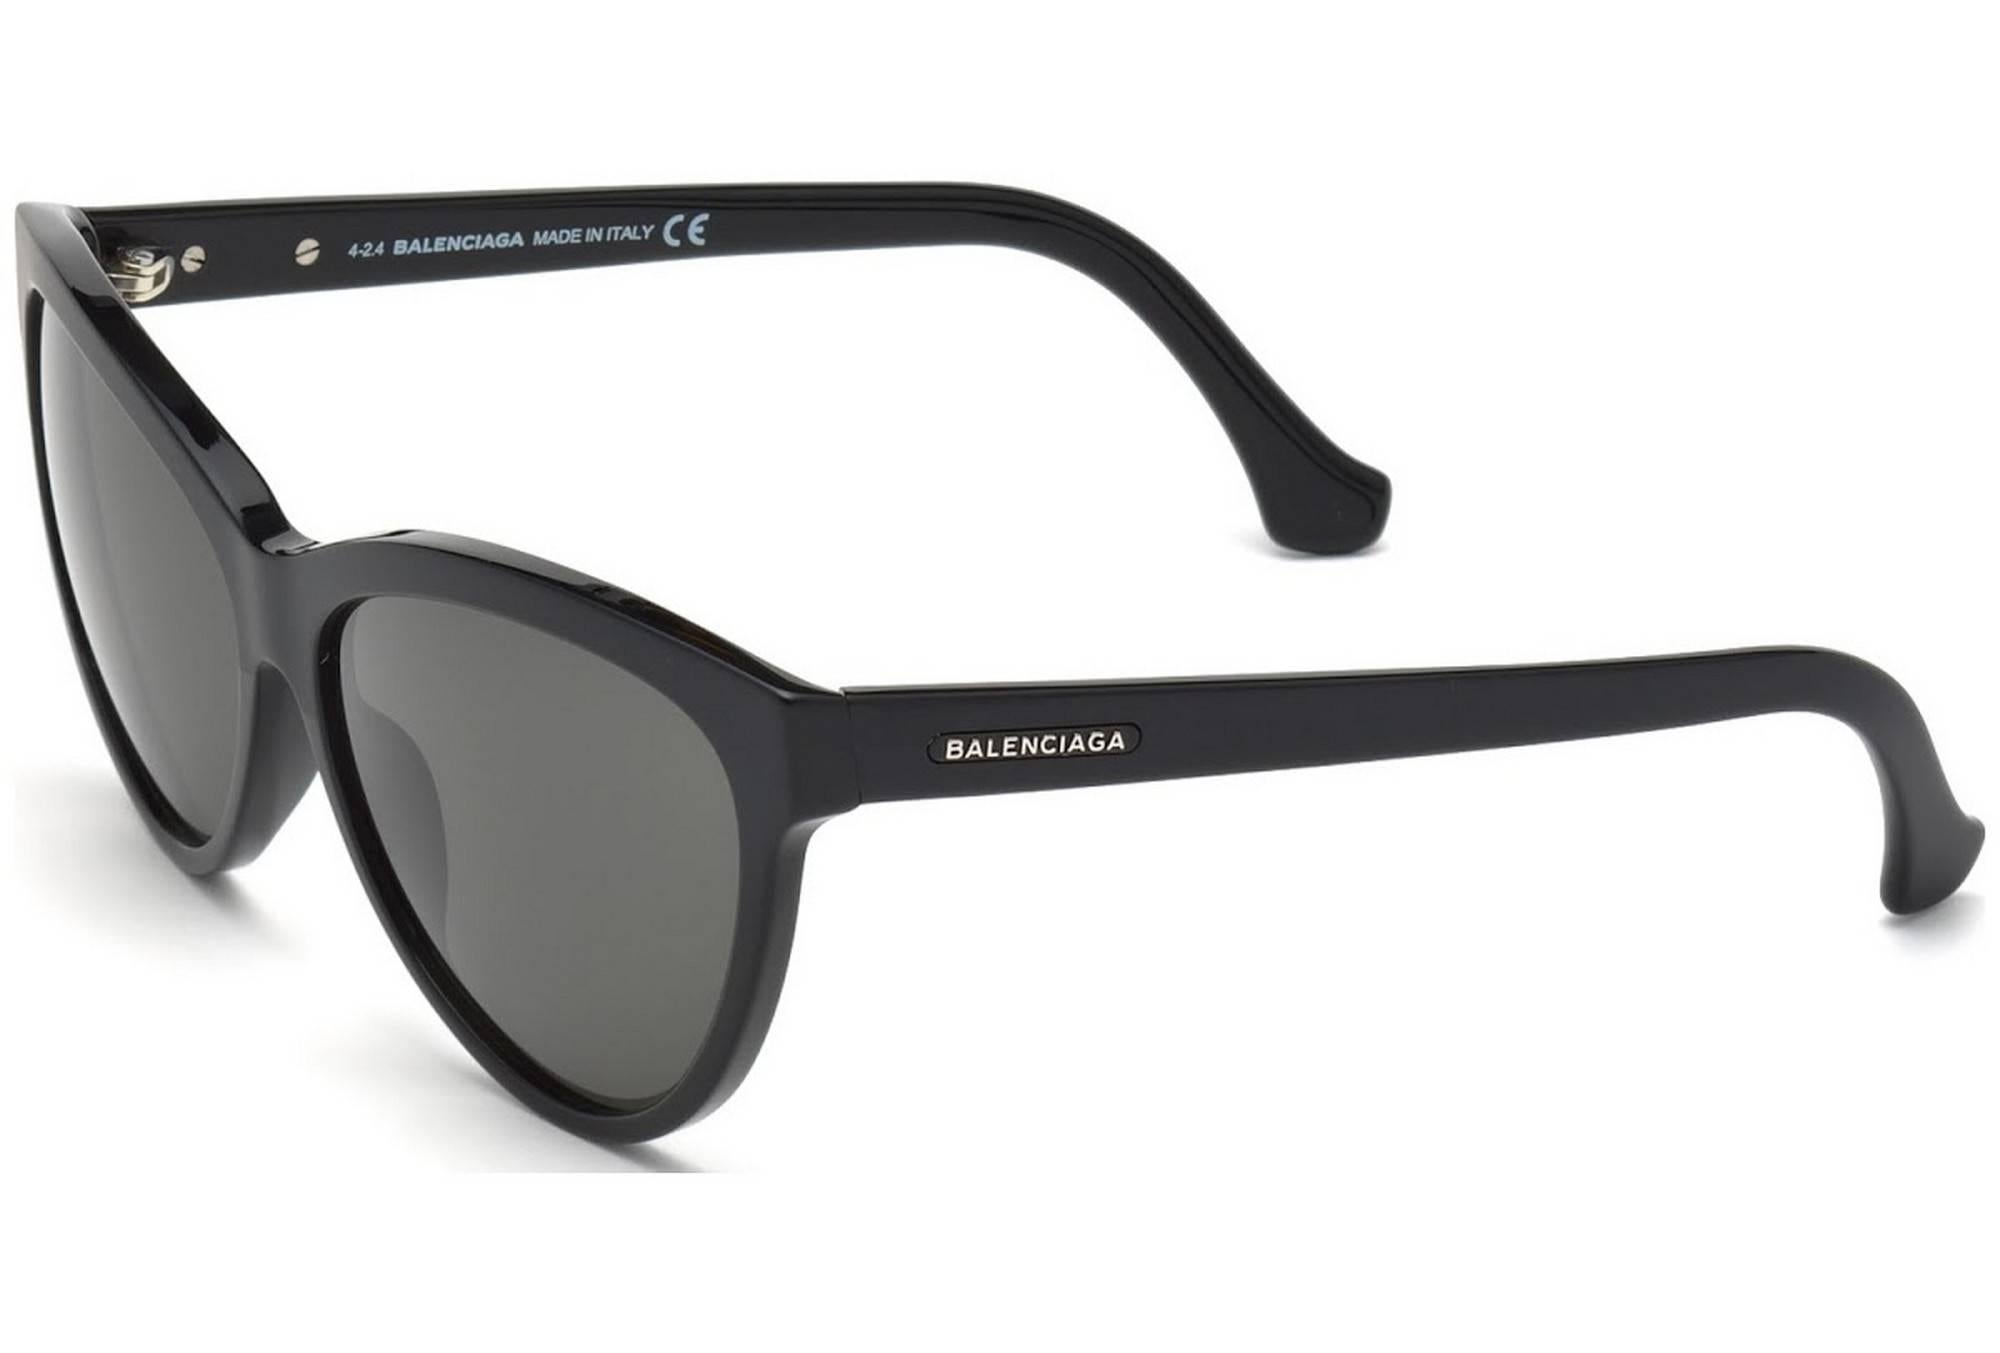 Balenciaga BA0029-05N-59 Black/Other / Green Sunglasses

Frame : Acetate
Brand new with original case and cleaning cloth.
Made in Italy